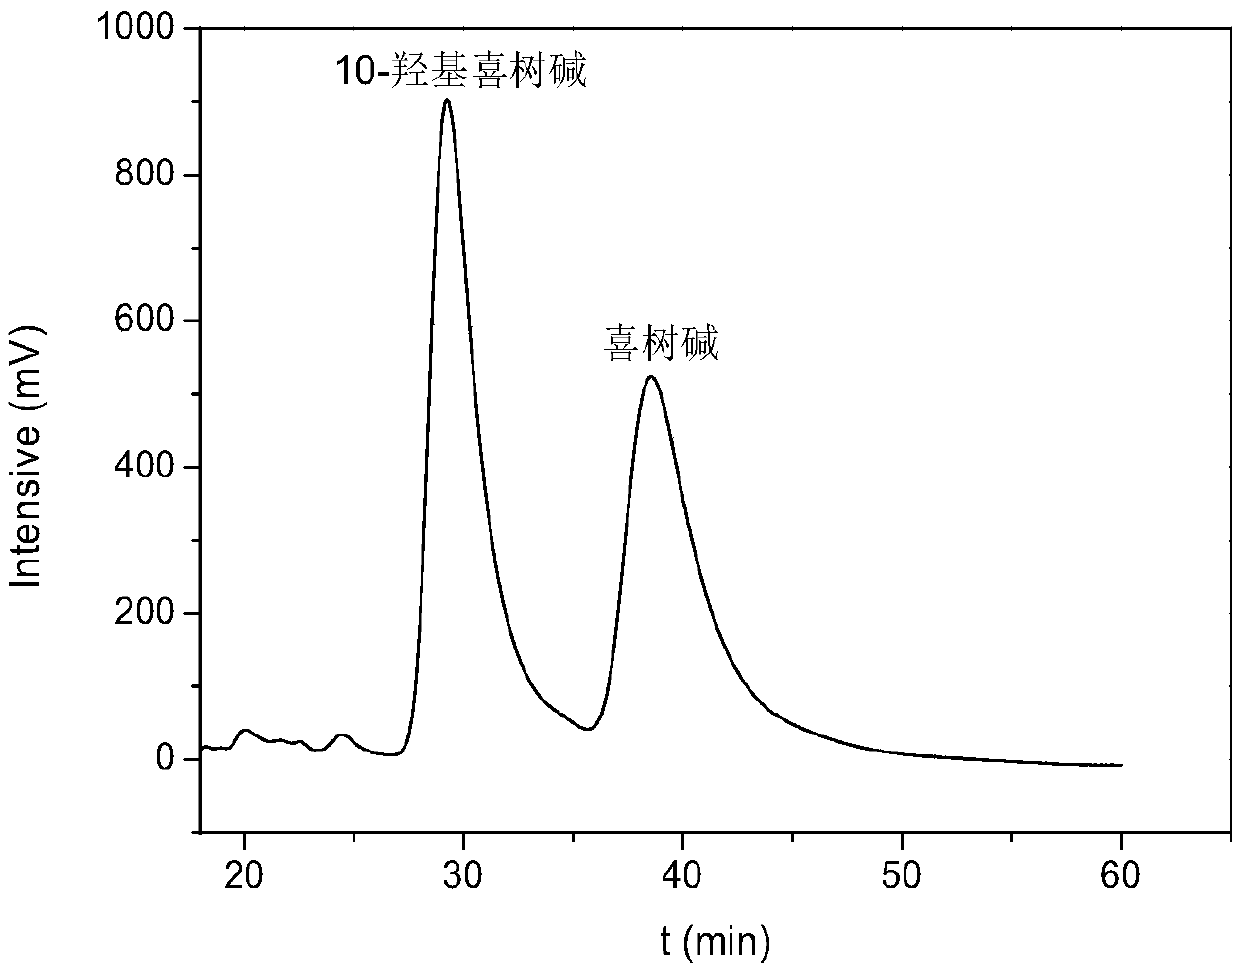 Method for efficient separation of camptothecin and 10-hydroxycamptothecin by core-shell SiO2@rosin-based polymer chromatographic column